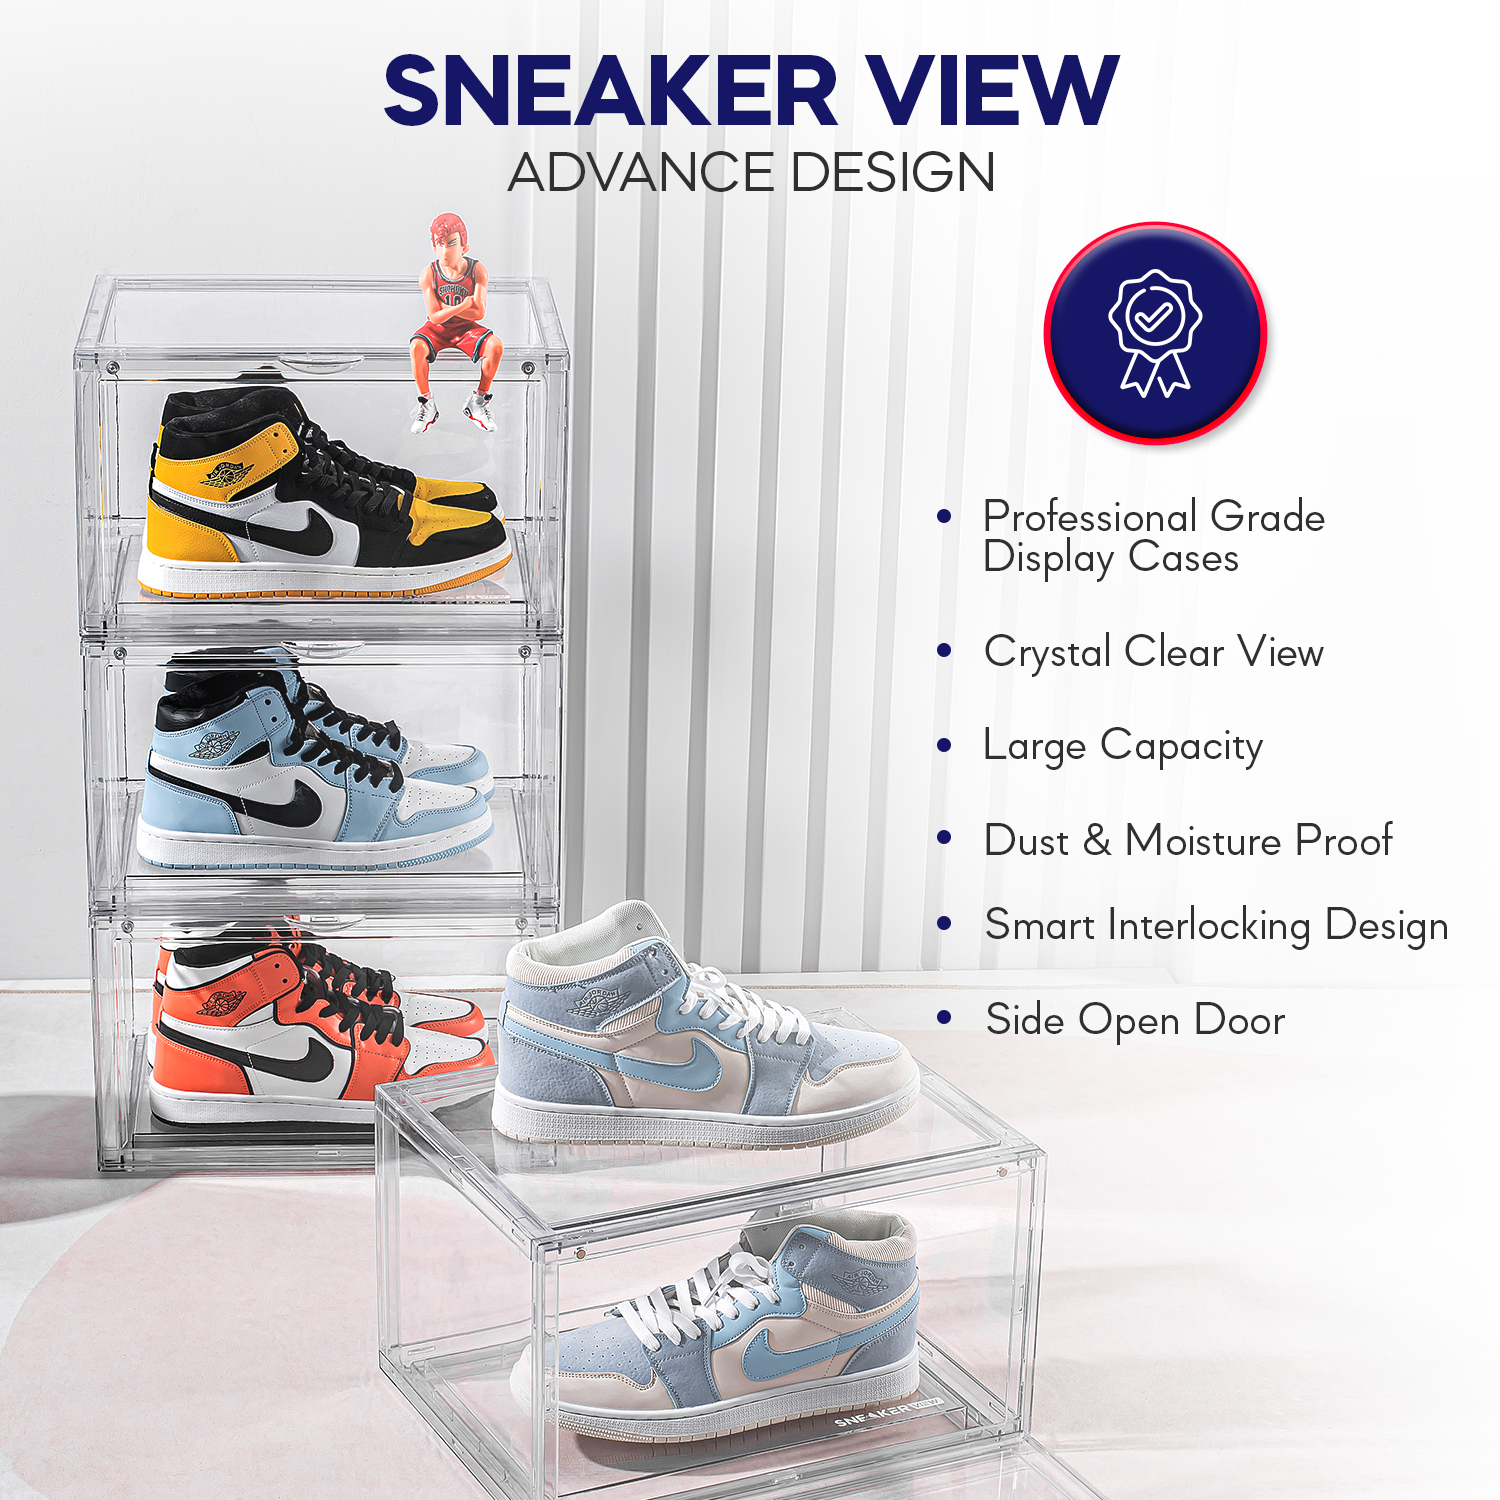 Sneakerview Acrylic Shoe Storage Box – Ultra clear plastic Stackable sneaker storage container. Professional grade shoe display case .Boots and hat Organizer . Fits Up to US Size 15 - 3 pack